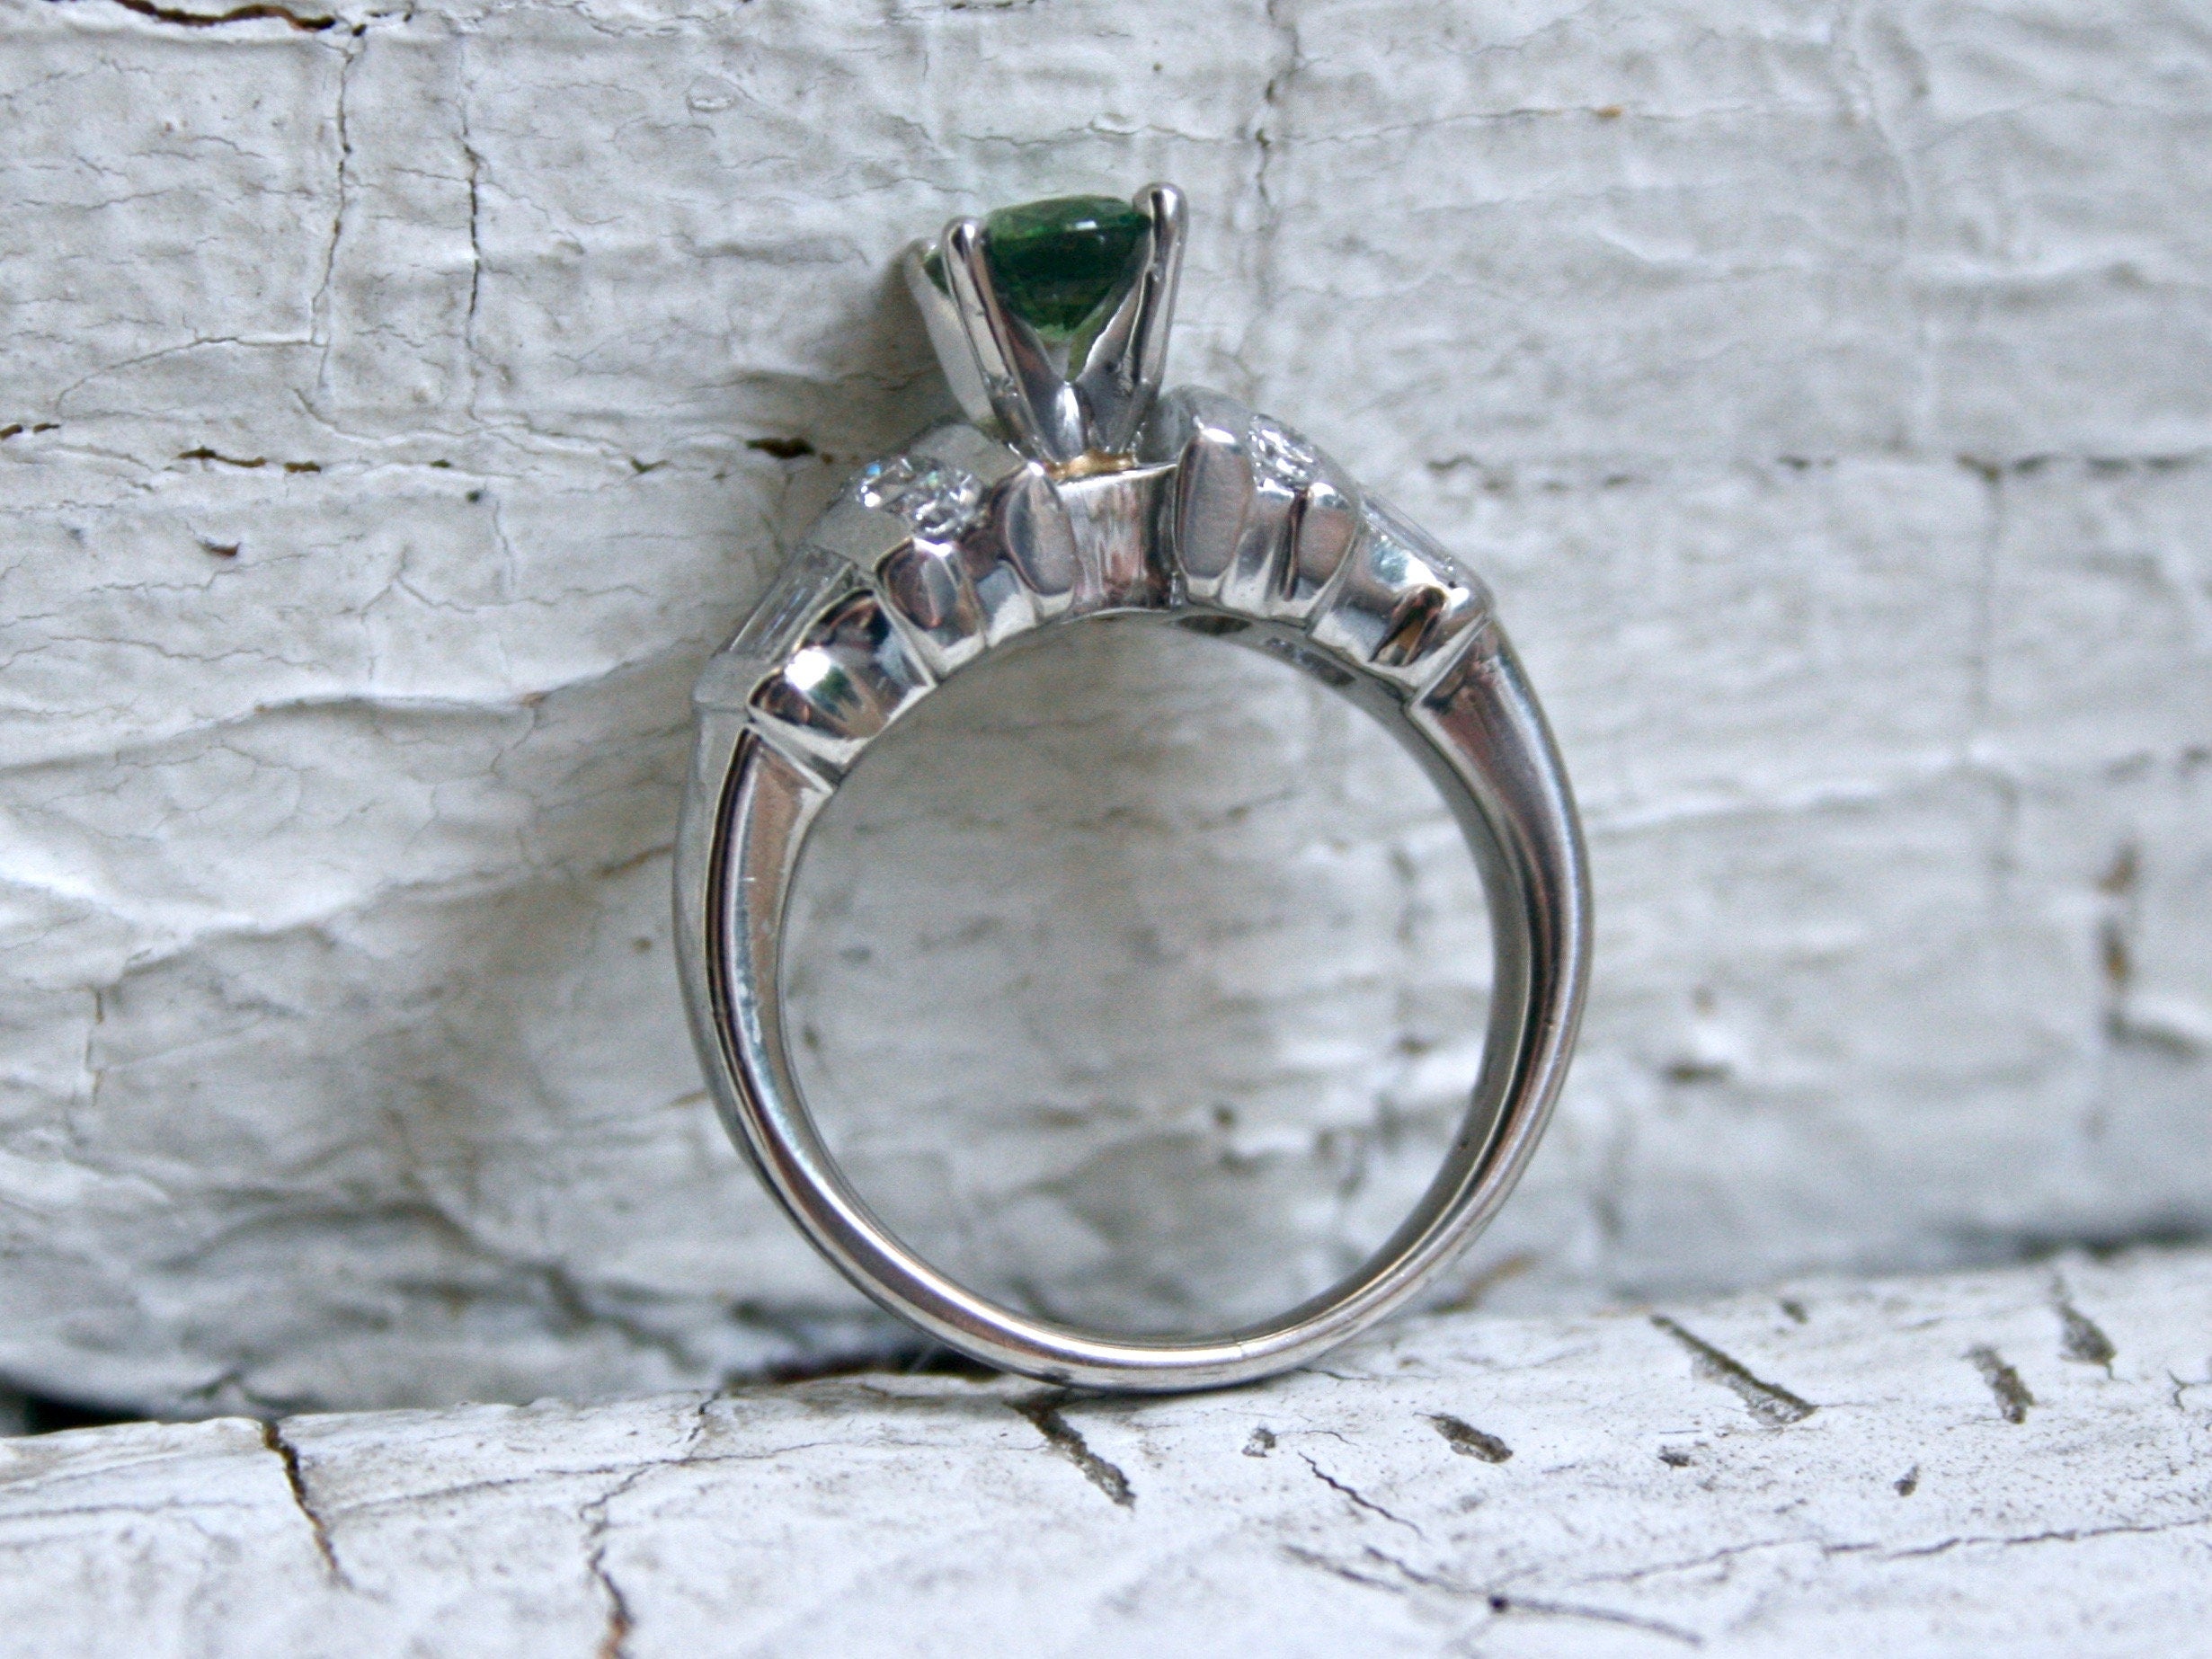 Vintage Platinum Green Sapphire and Diamond Ring Engagement Ring - 1.23ct